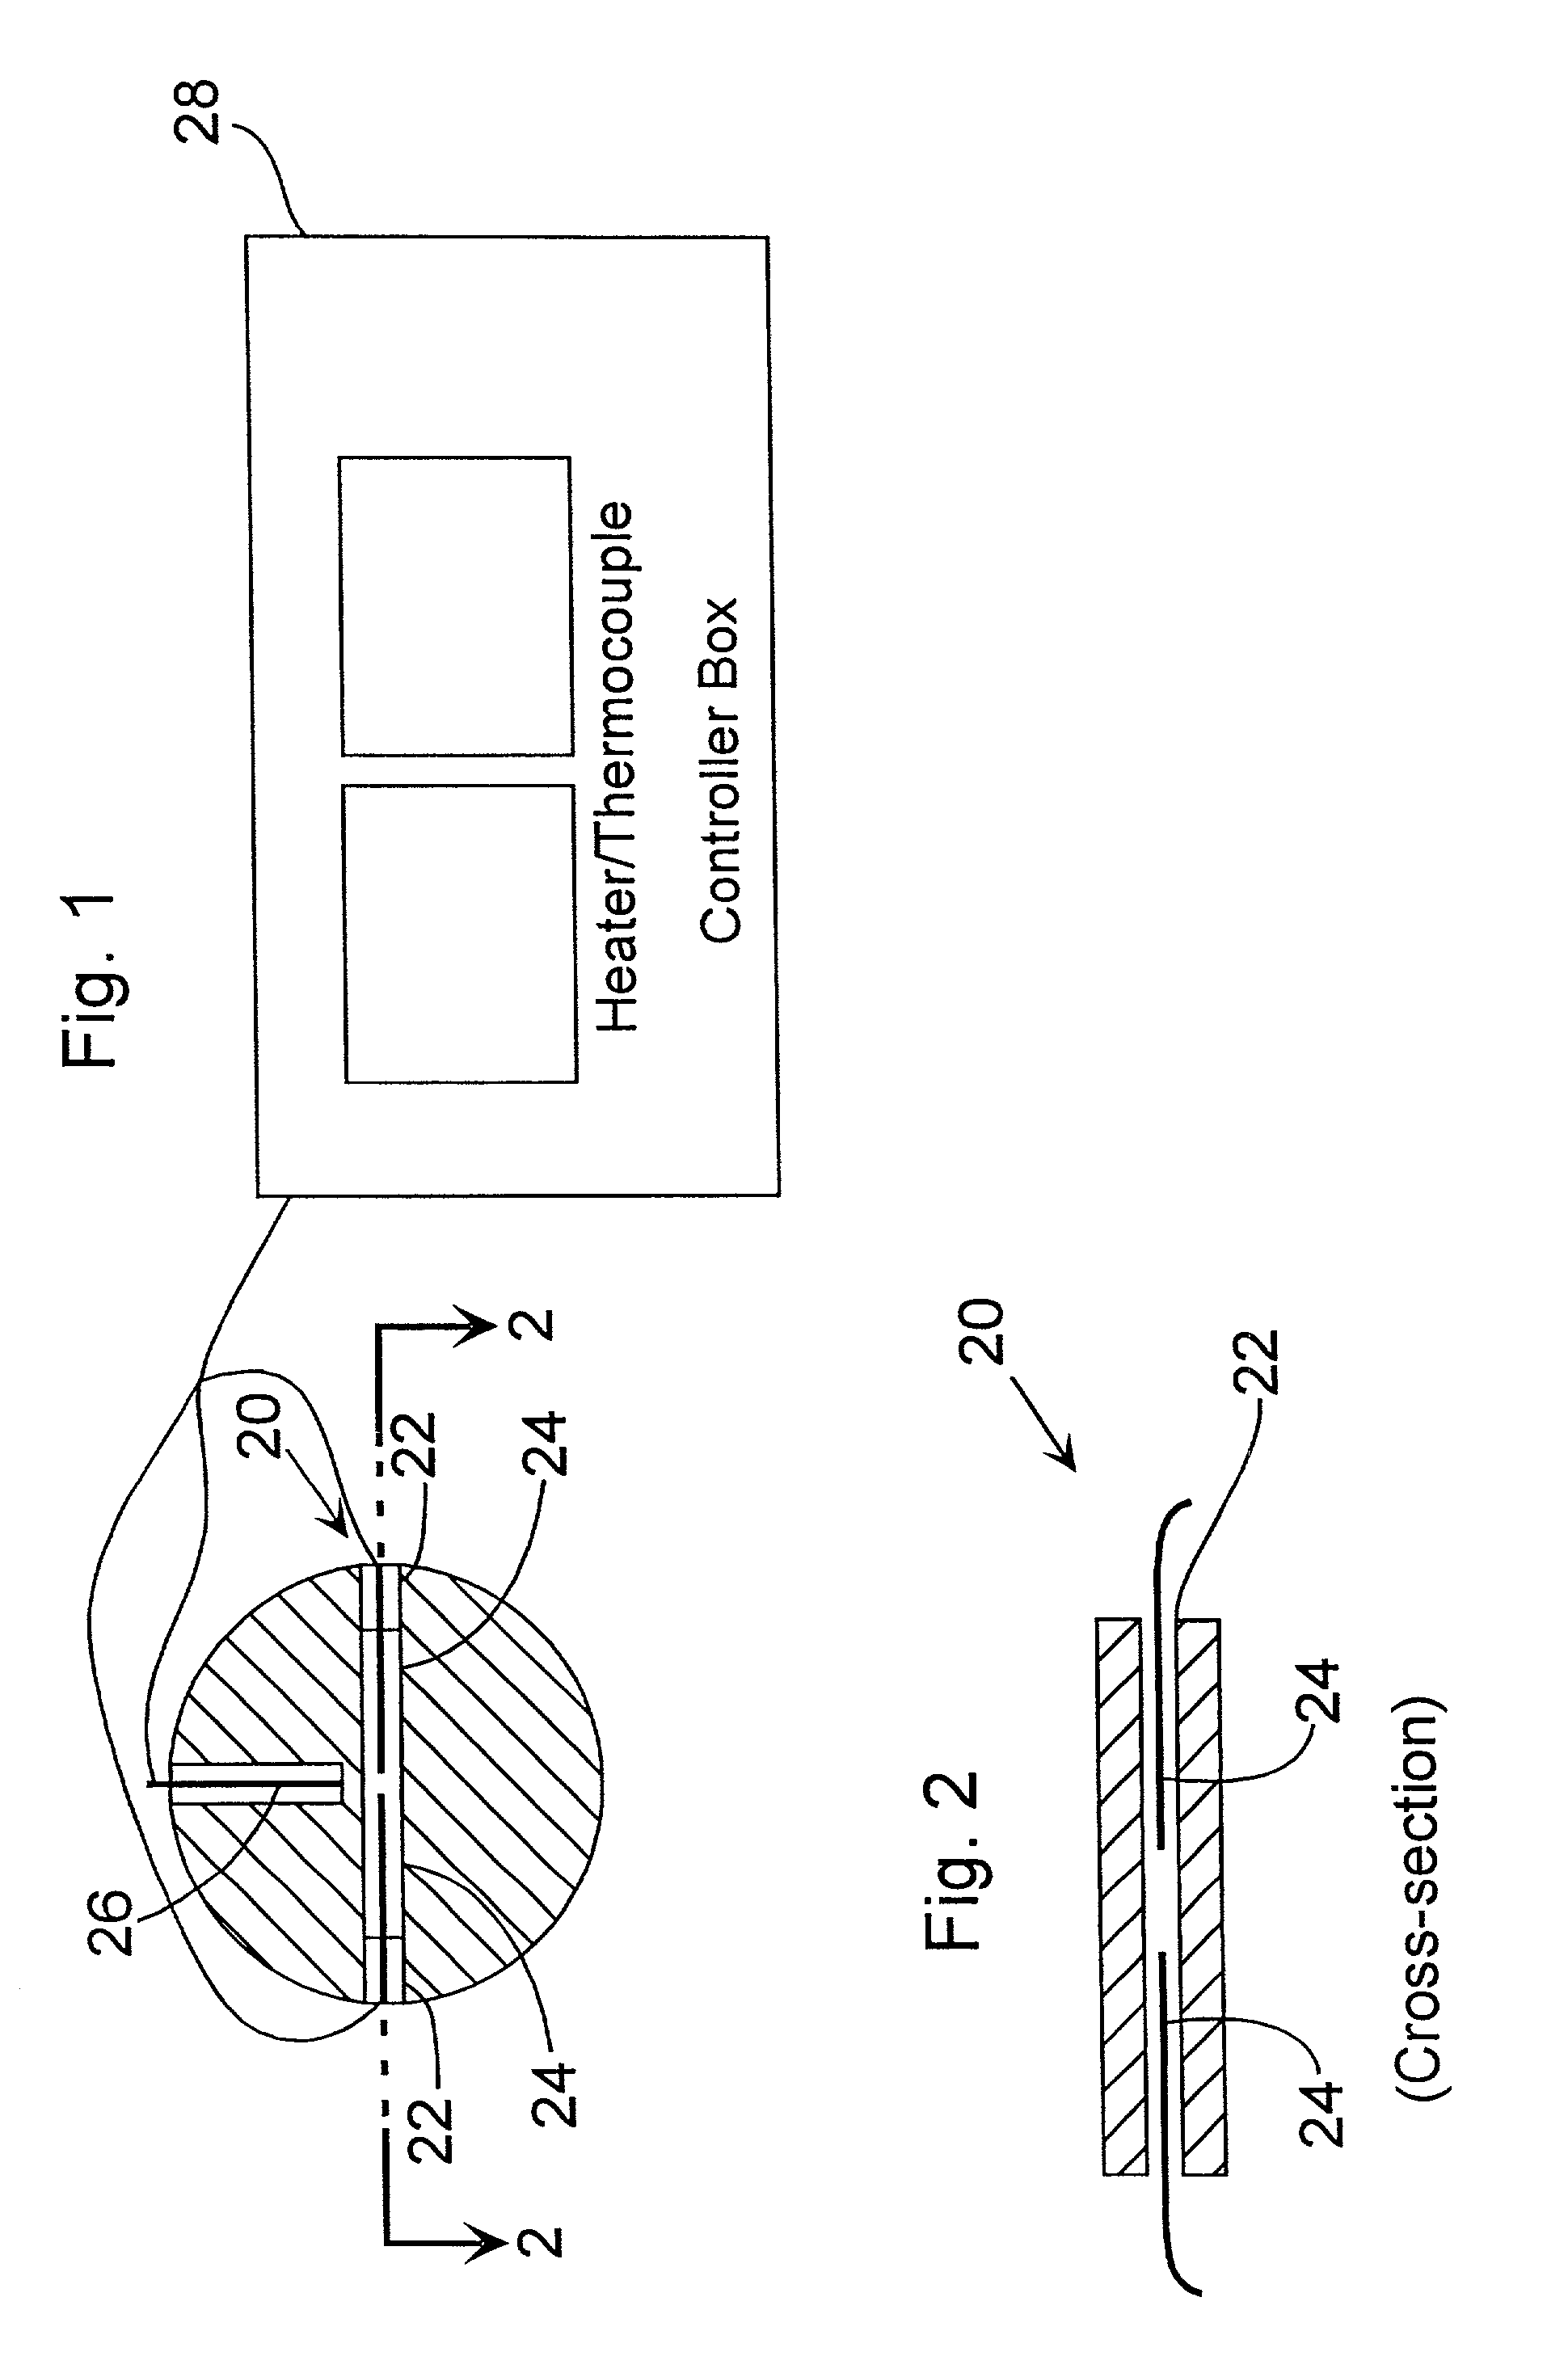 Reactor with heated and textured electrodes and surfaces